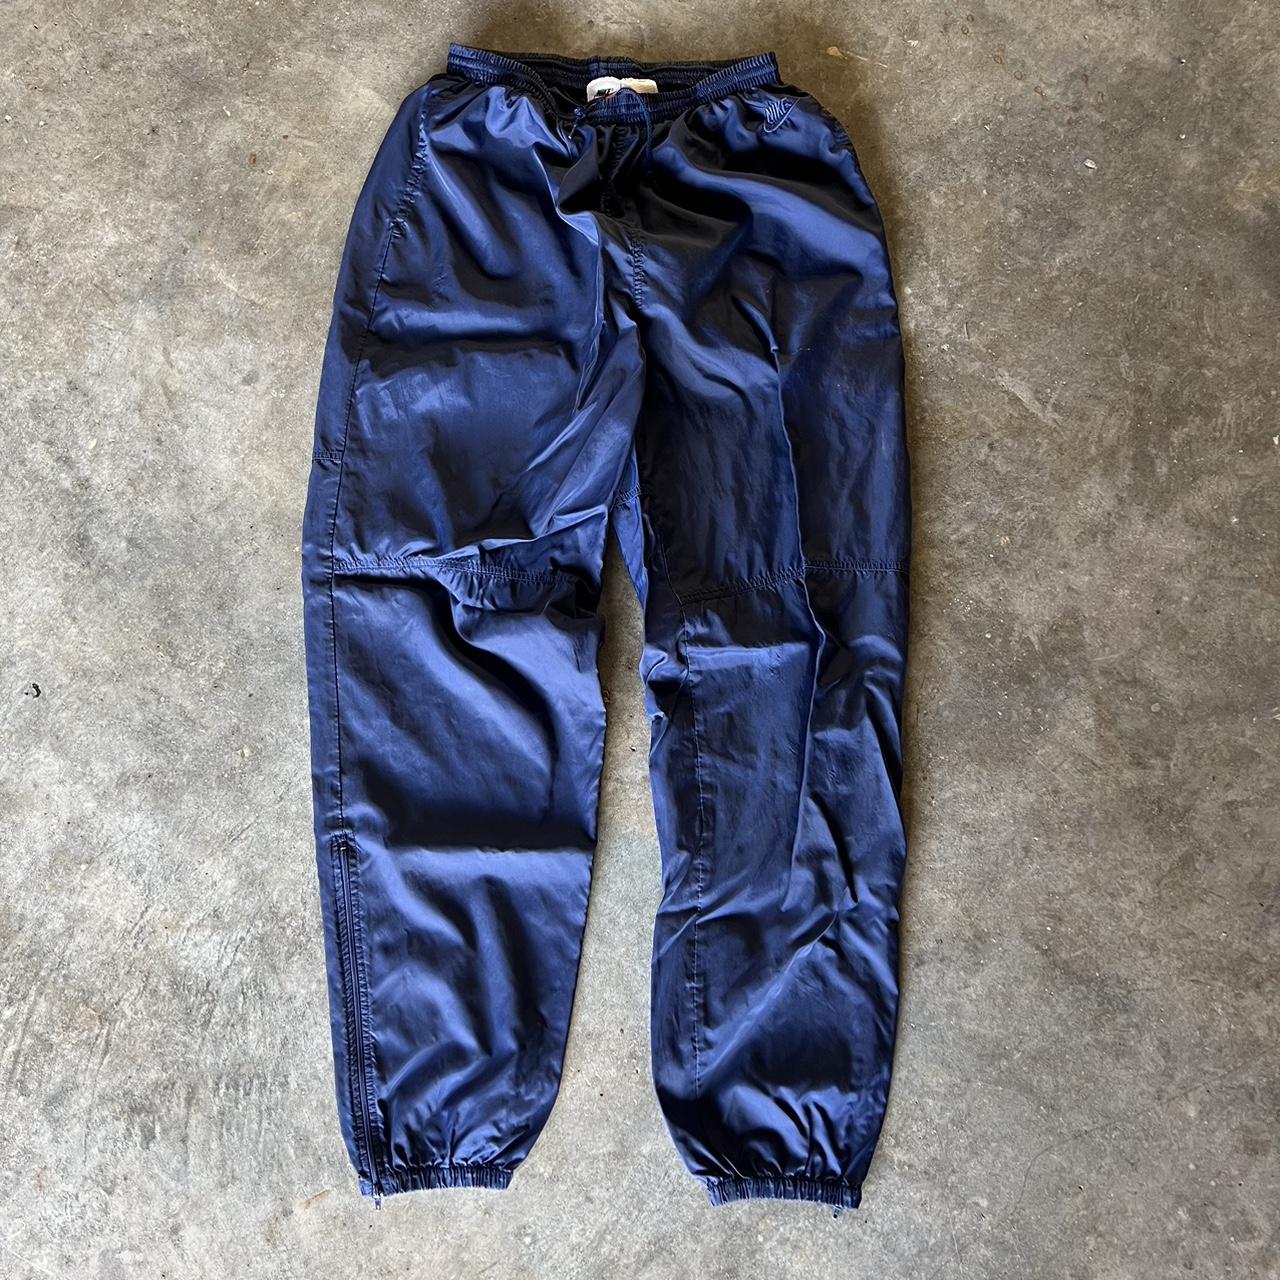 Nike Track Pants, • Size XL, • From early 2000’s, •